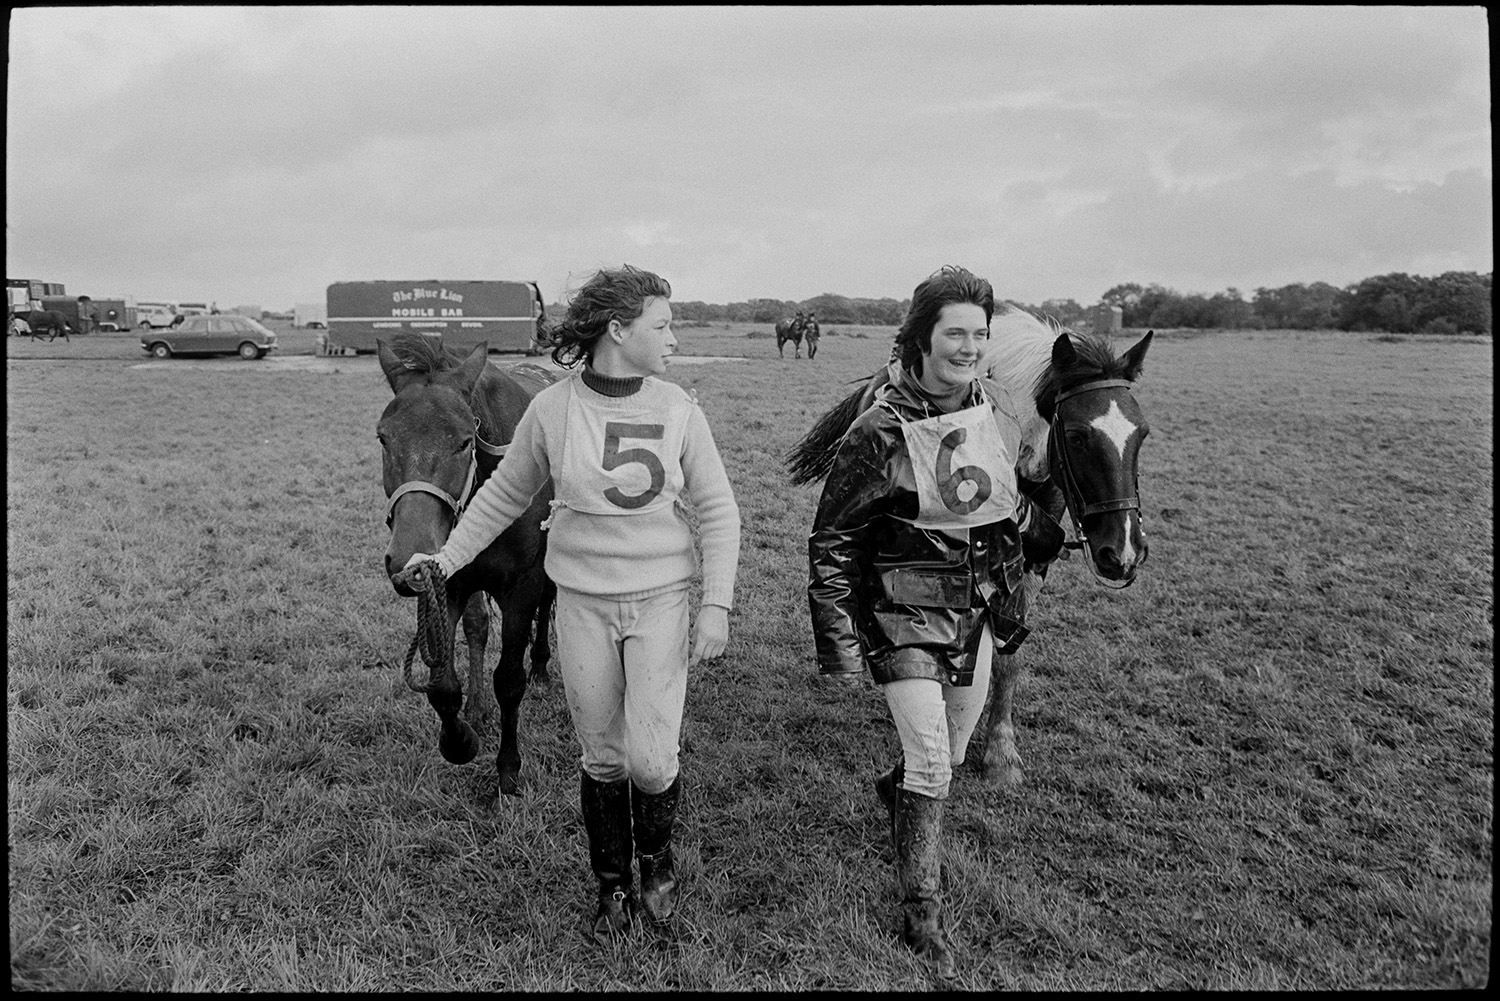 Competitors with horses at Steeplechase.
[A woman and a girl leading horses across Winkleigh Aerodrome, after taking part in a steeplechase. Vehicles and horse boxes are visible in the background.]